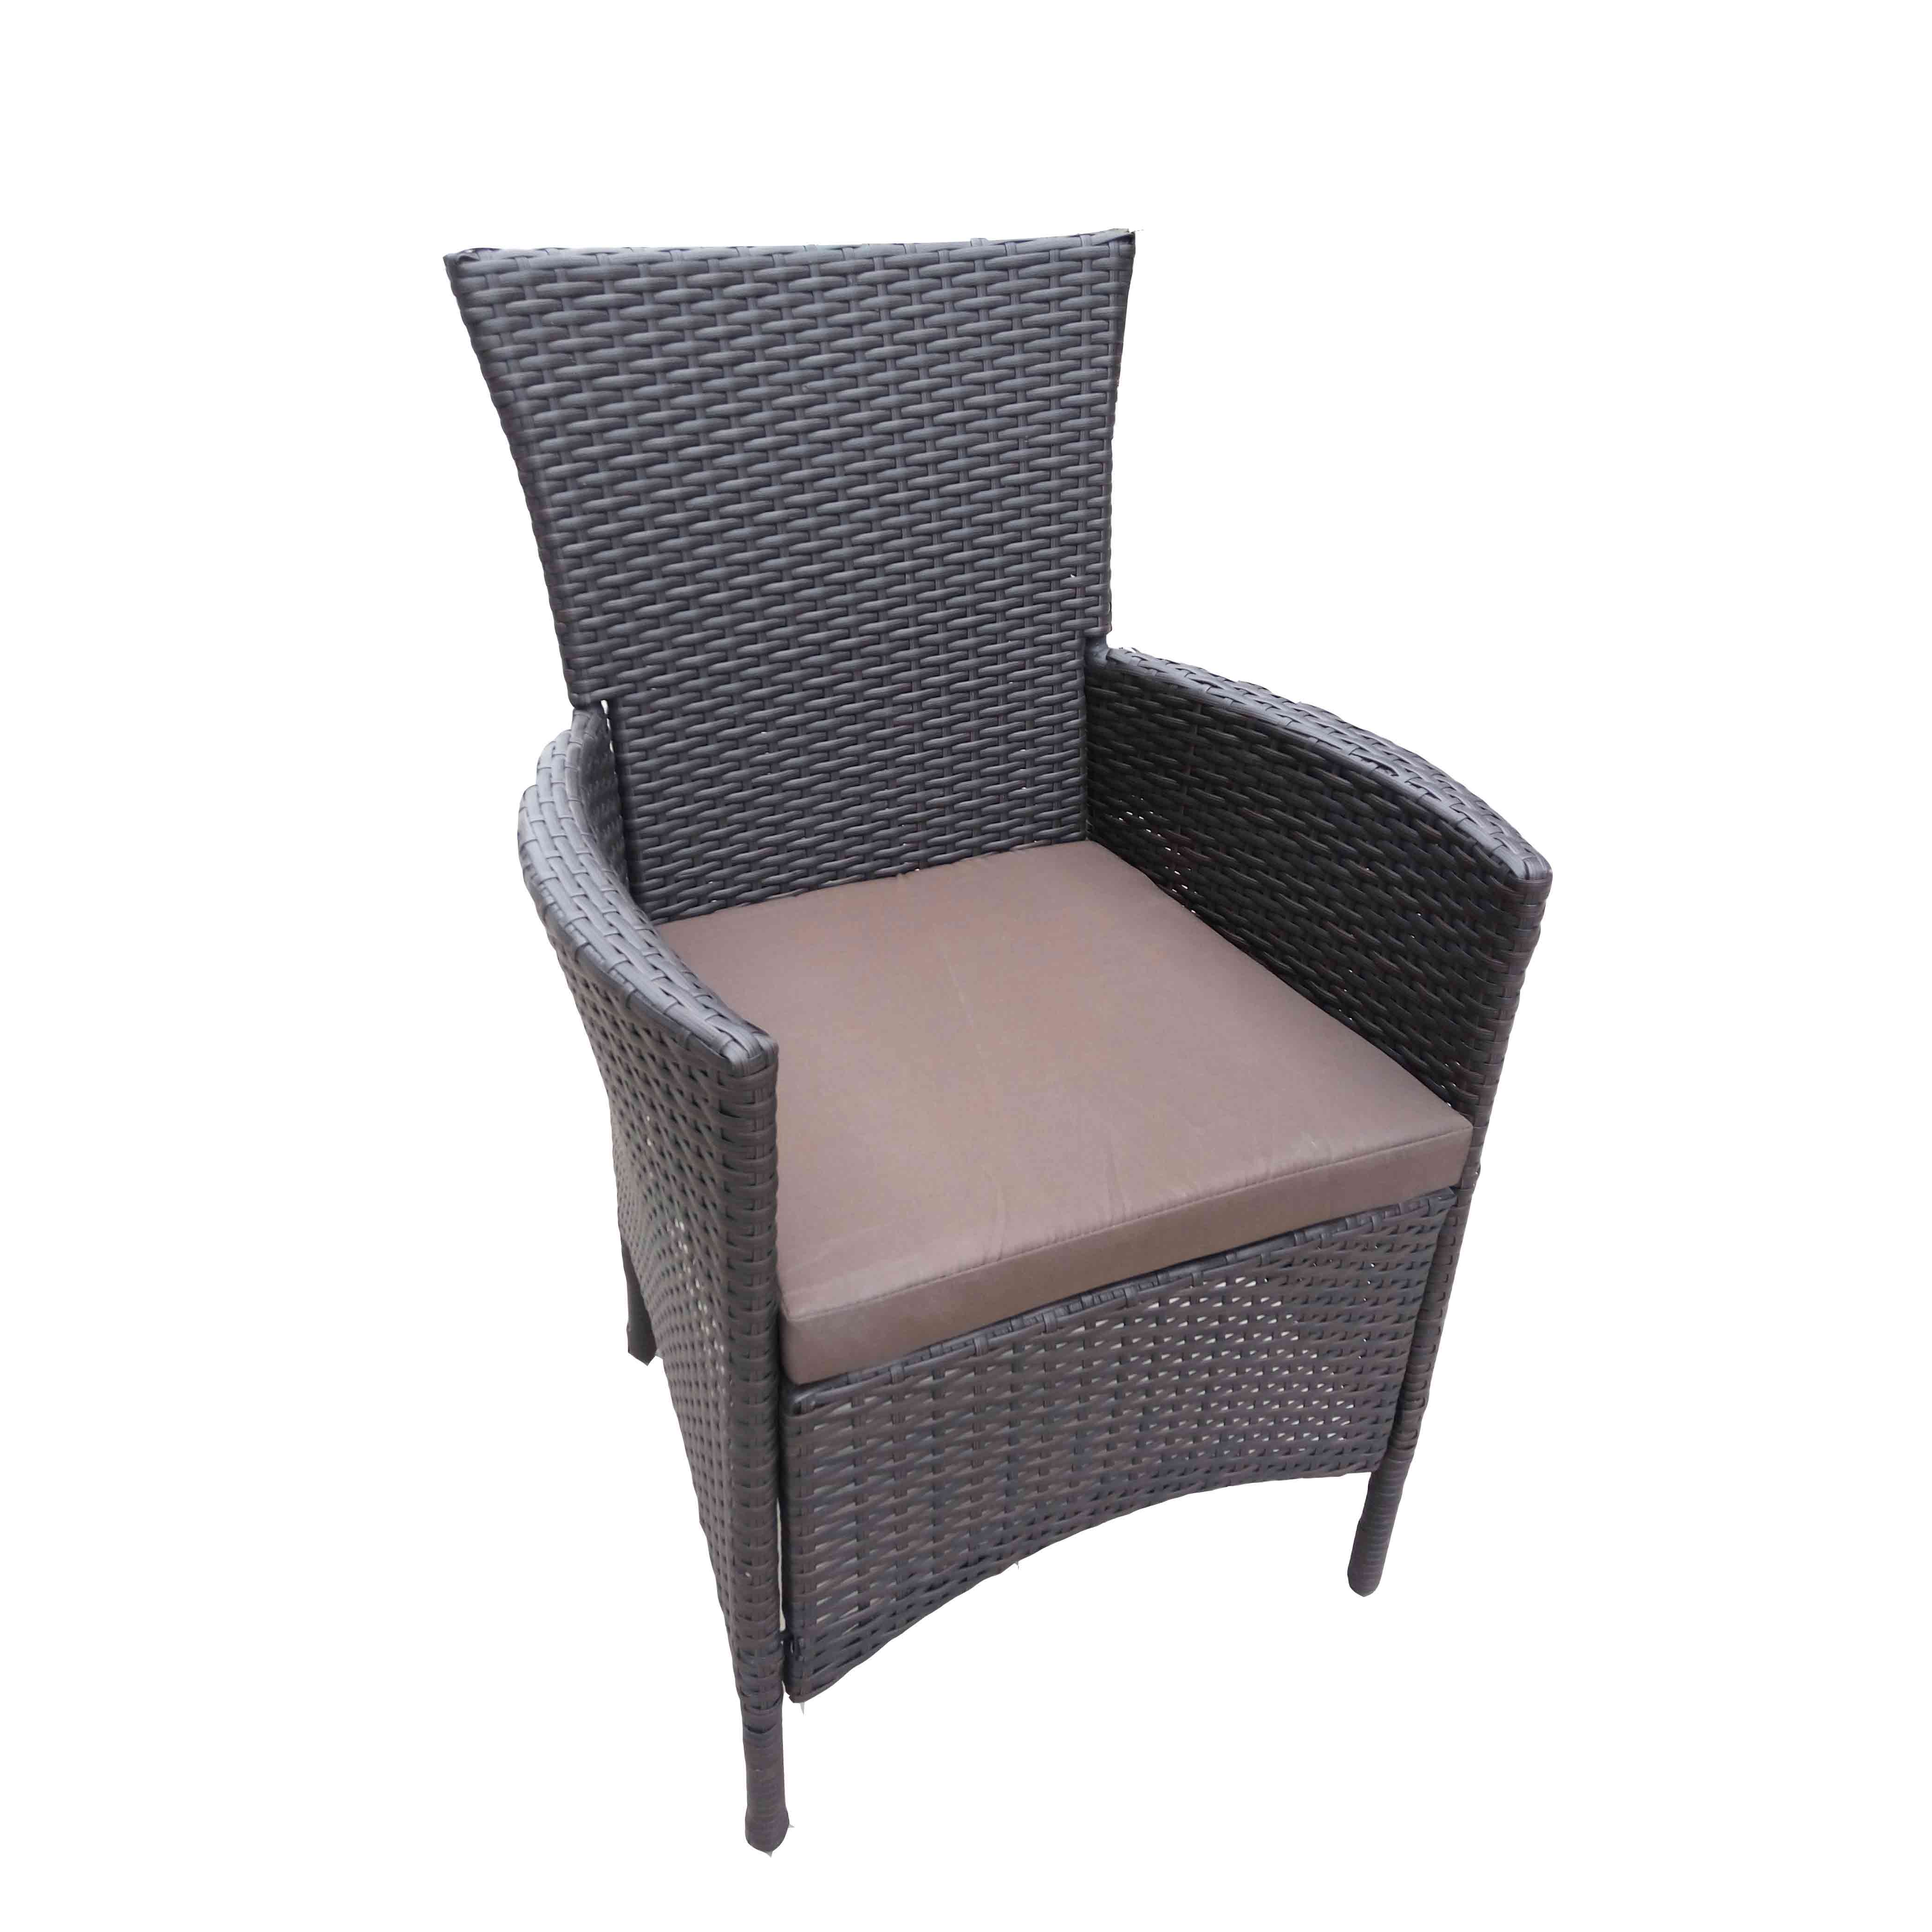 Low price for Rattan Chair With Cushion - JJC3005 Steel Frame Stacking Wicker dinning Chair – Jin-jiang Industry